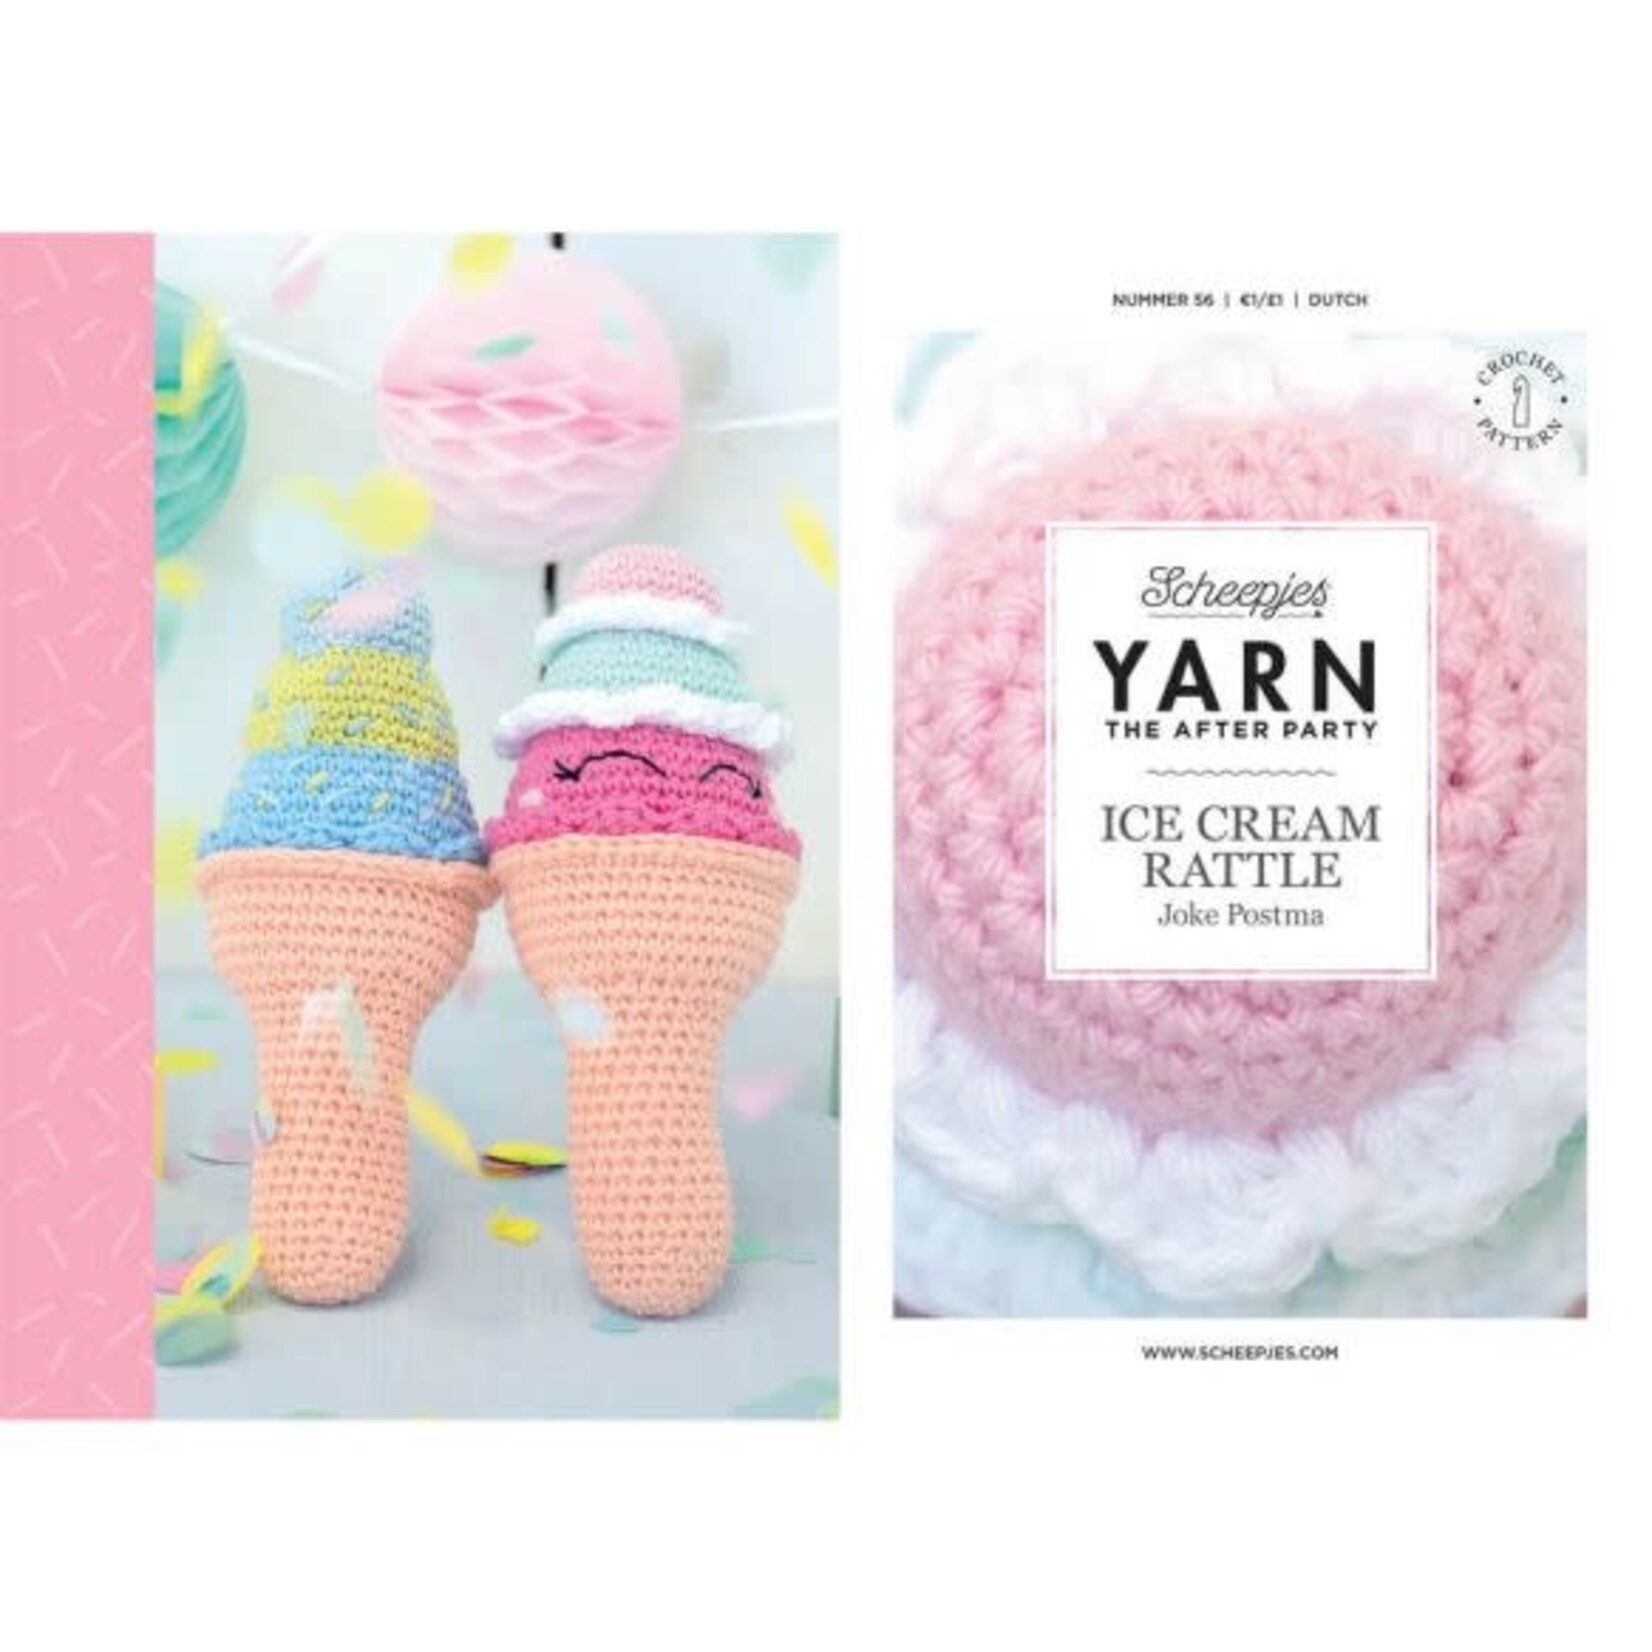 Scheepjes YARN The After Party nr.56 Ice Cream Rattle NL